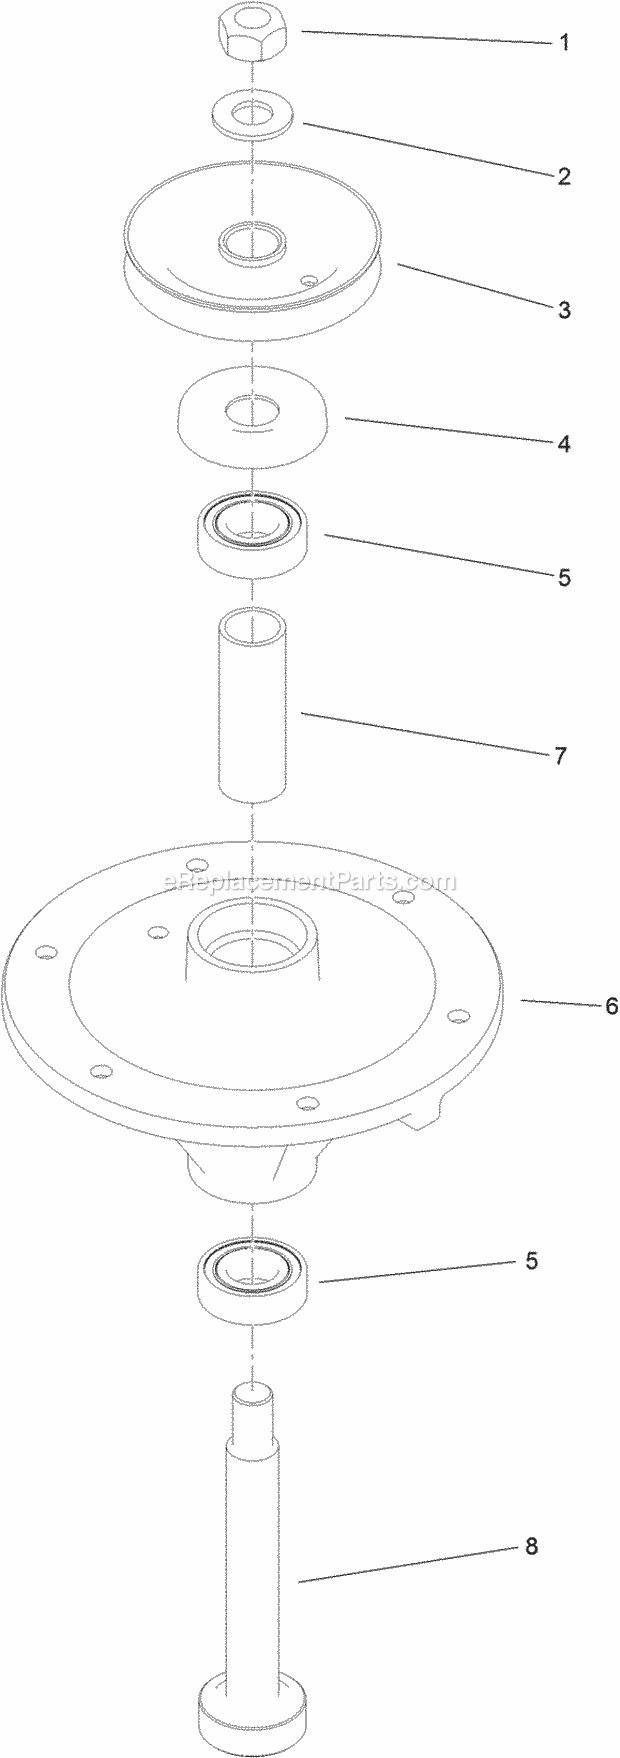 Toro 74536 (316000001-316999999) Grandstand Mower, With 40in Turbo Force Cutting Unit, 2016 Spindle Assembly No. 117-7640 Diagram